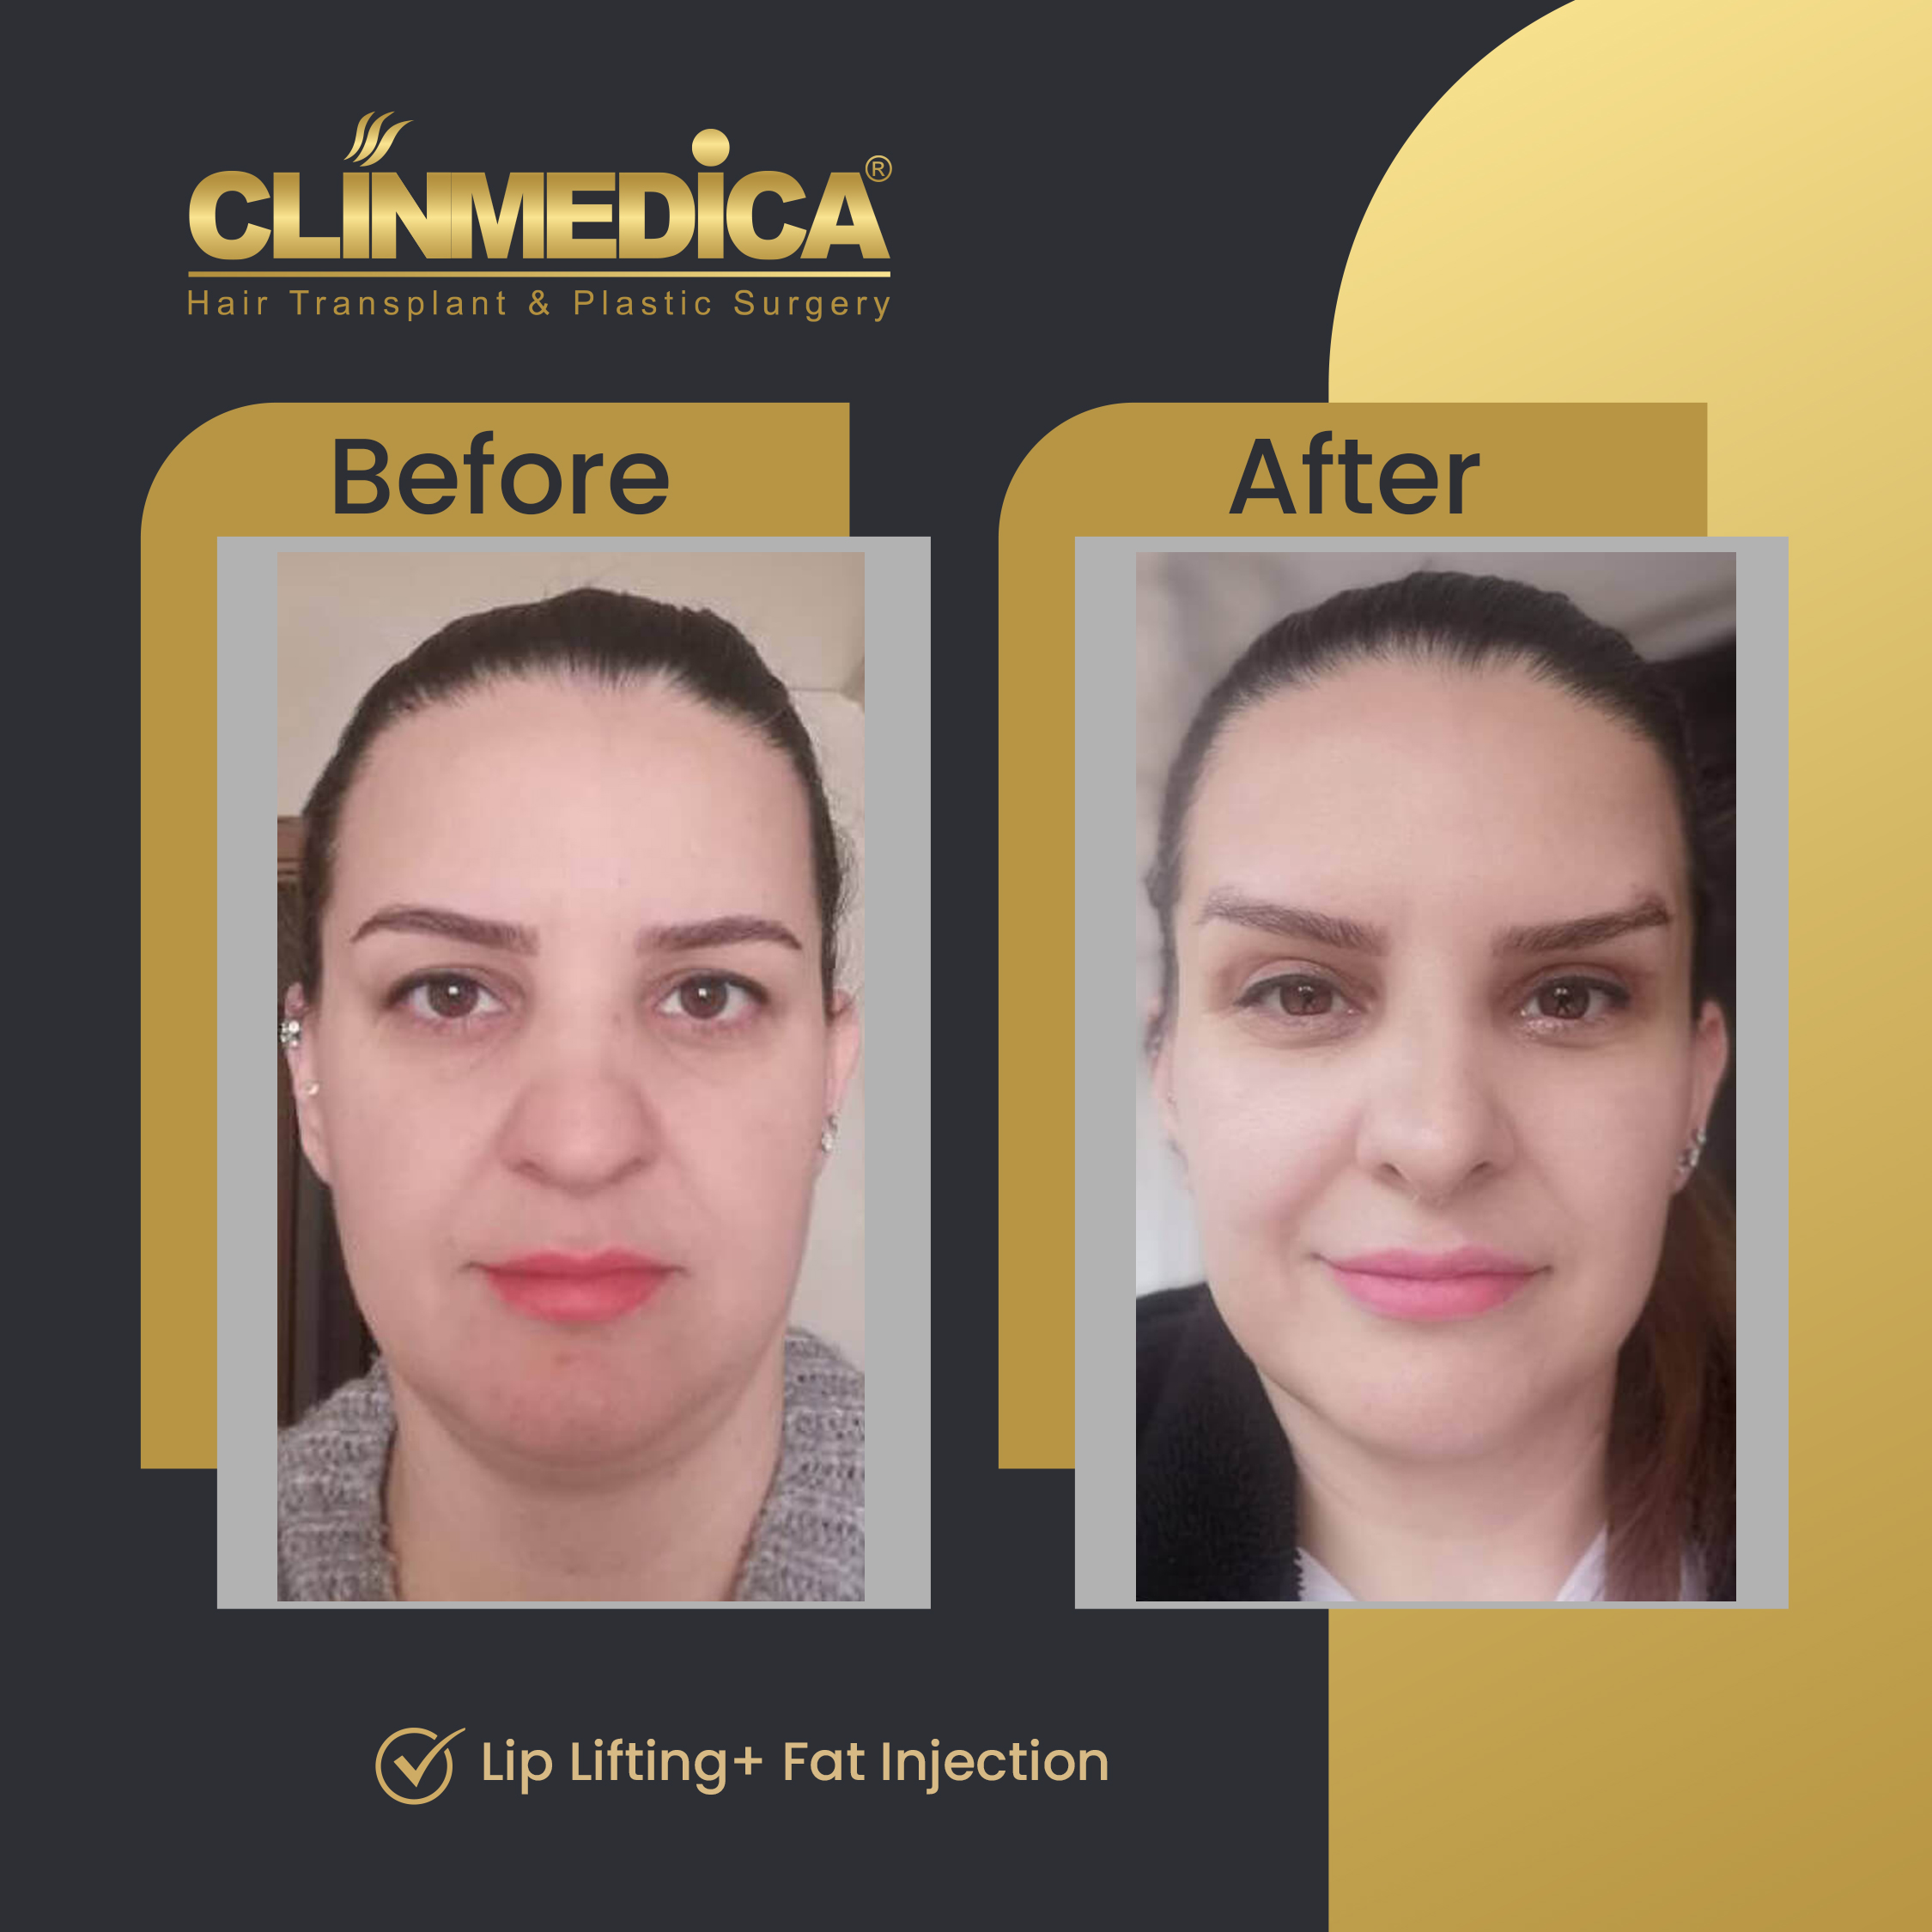 Lip Lifting & Fat Injection Before and After Results in Turkey